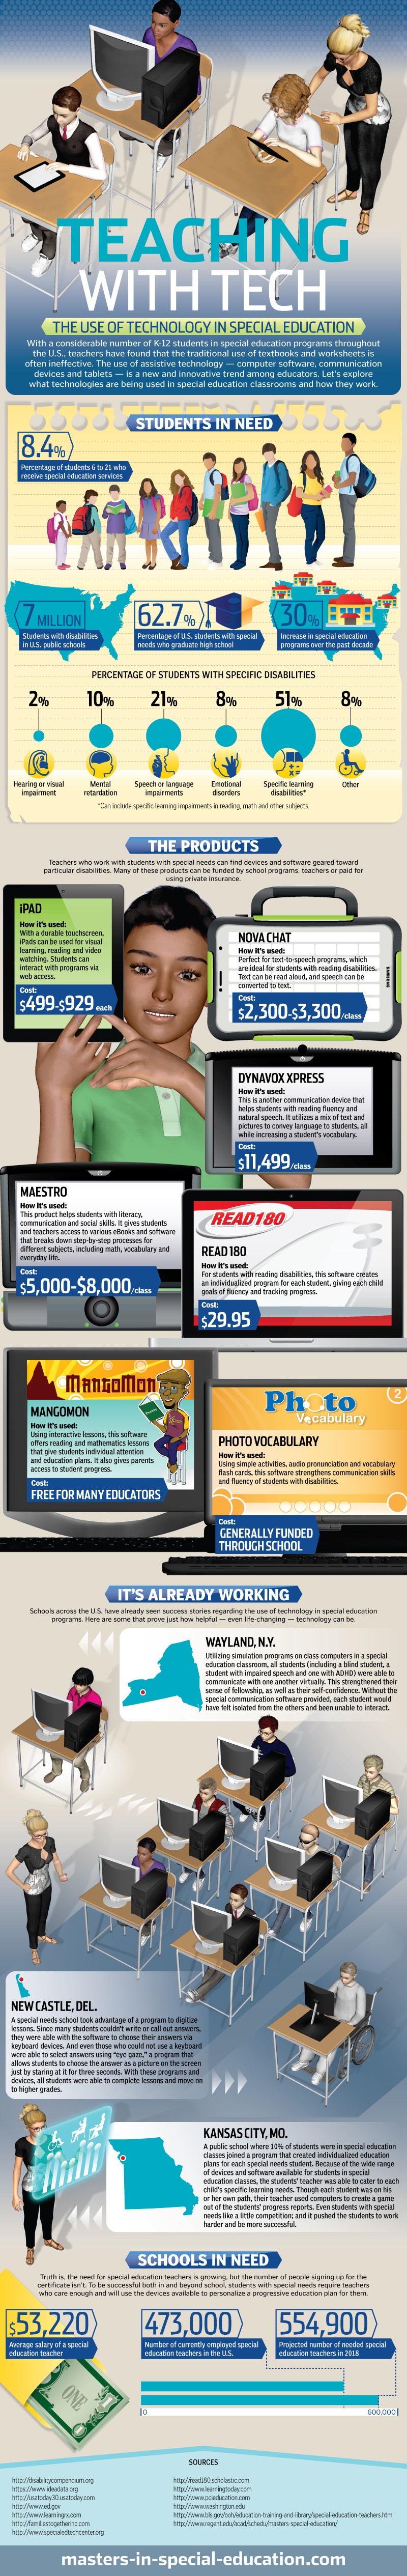 Teaching with Tech [Infographic]